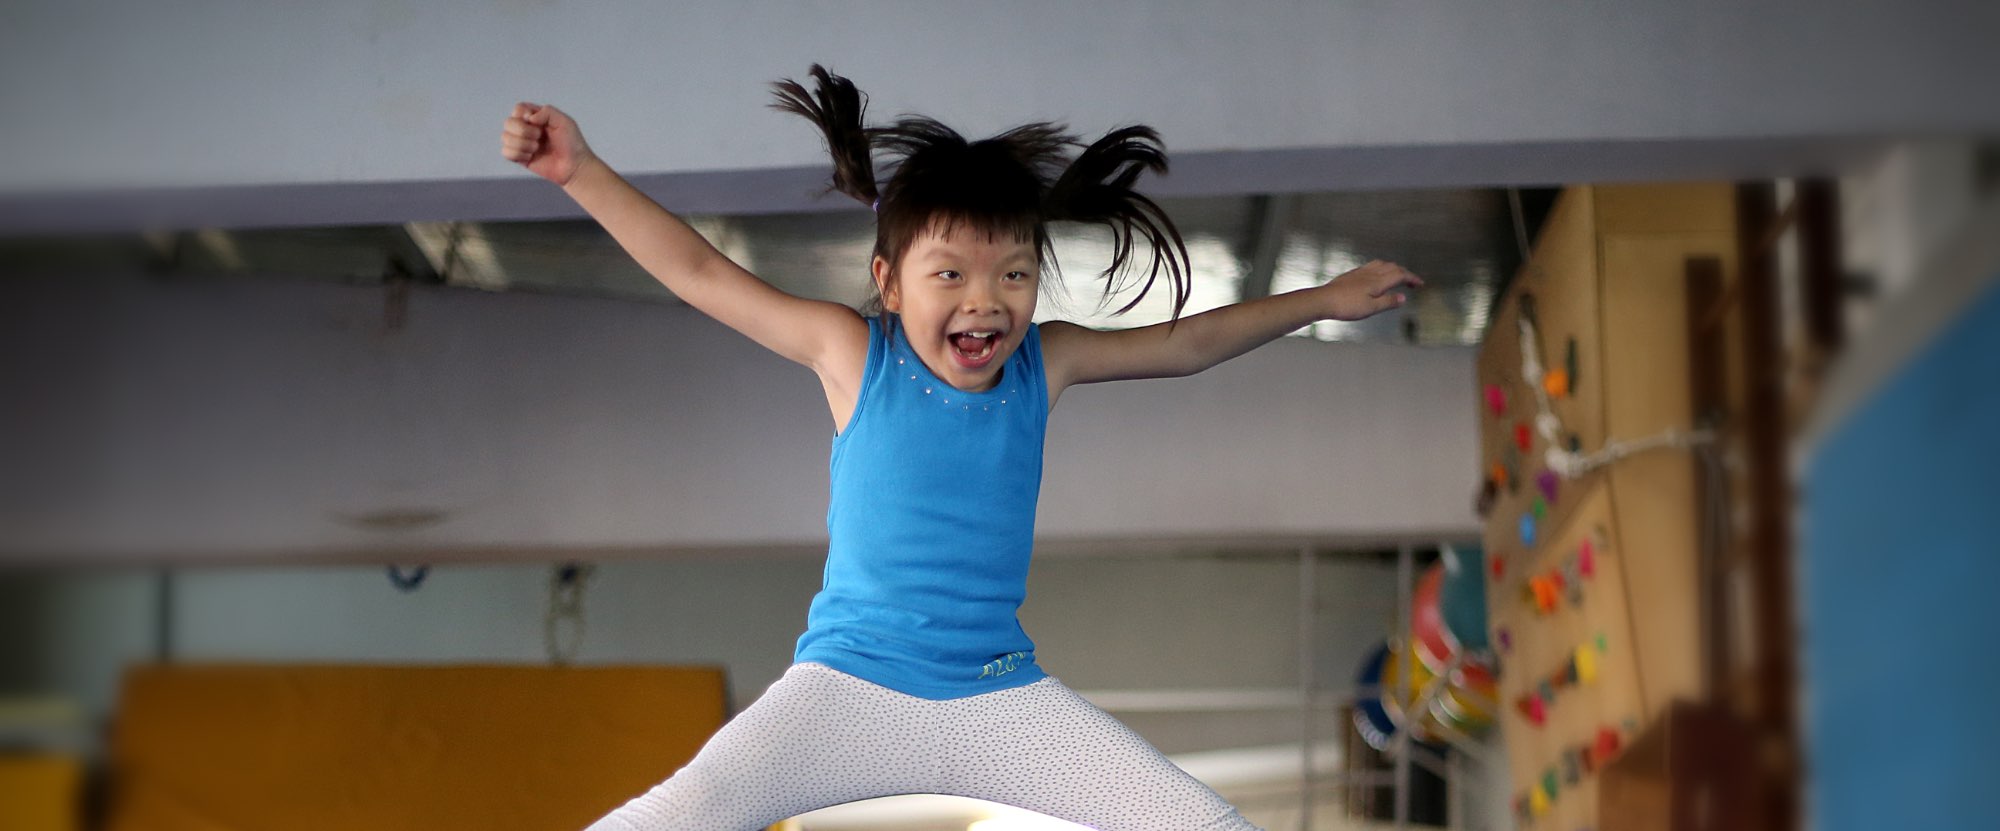 Girl in a blue t shirt doing a star jump and smiling. She has her arms outstretched.